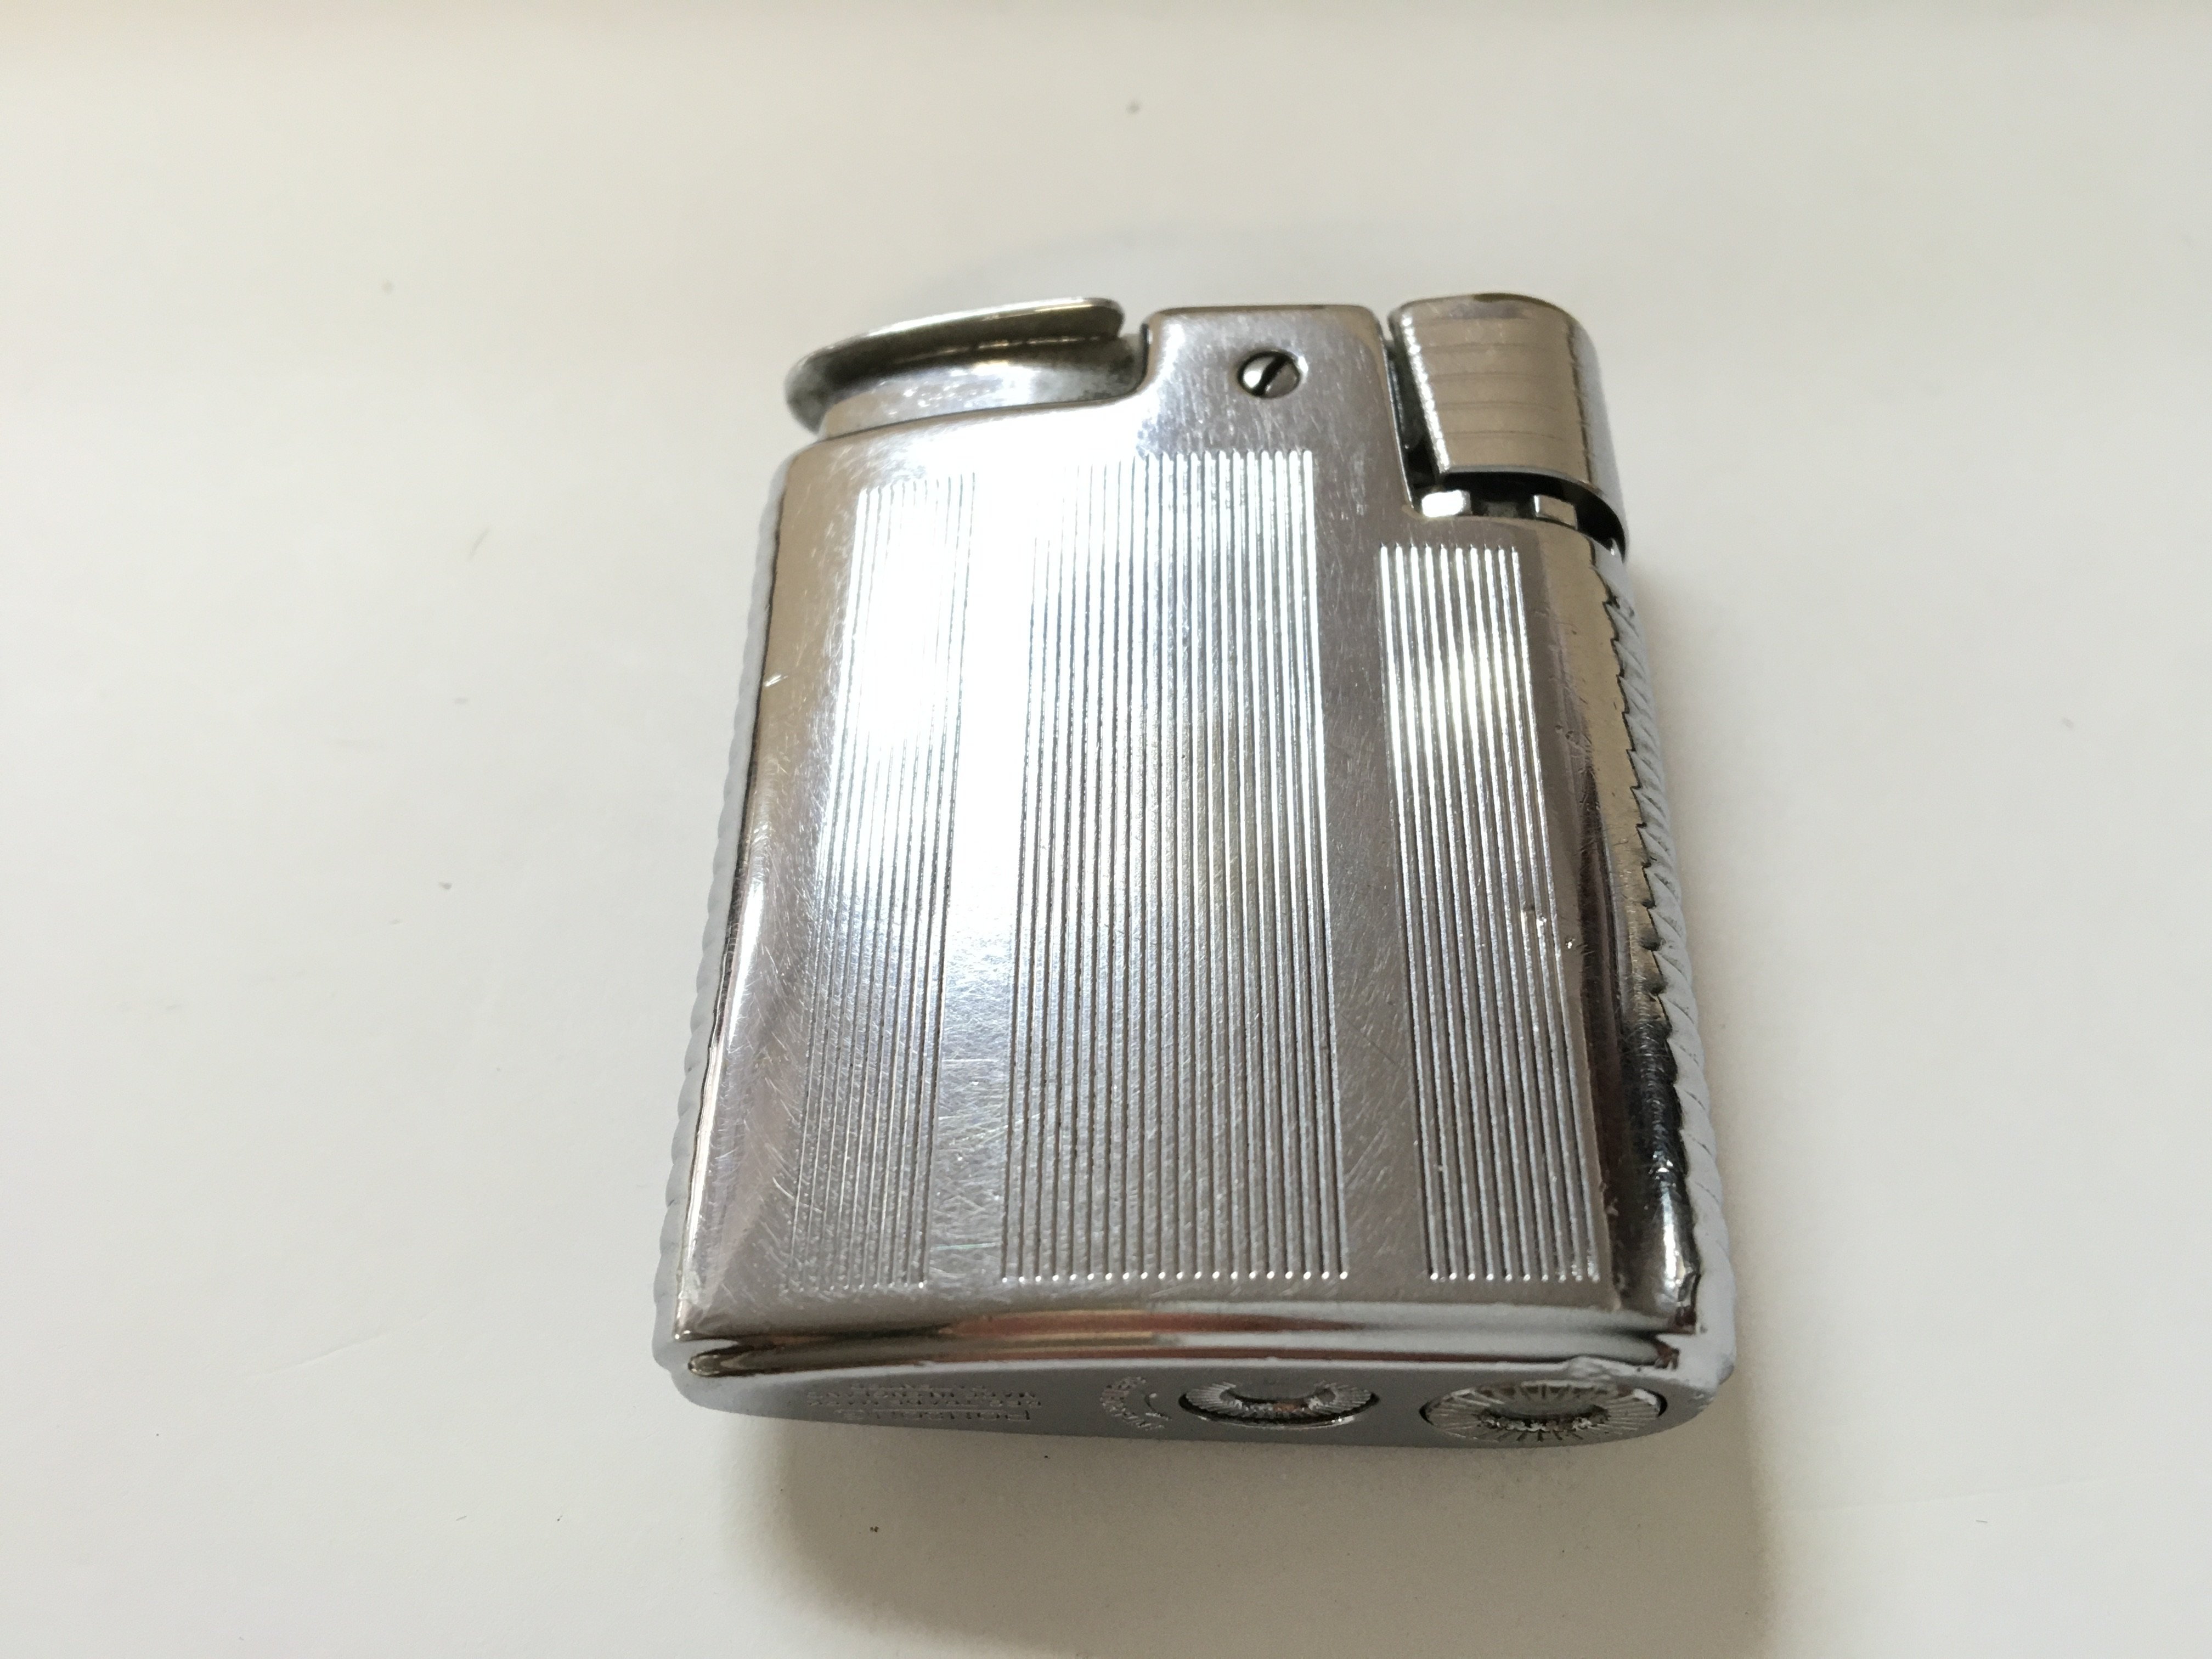 A Ronson varaflame lighter in box. - Image 2 of 2